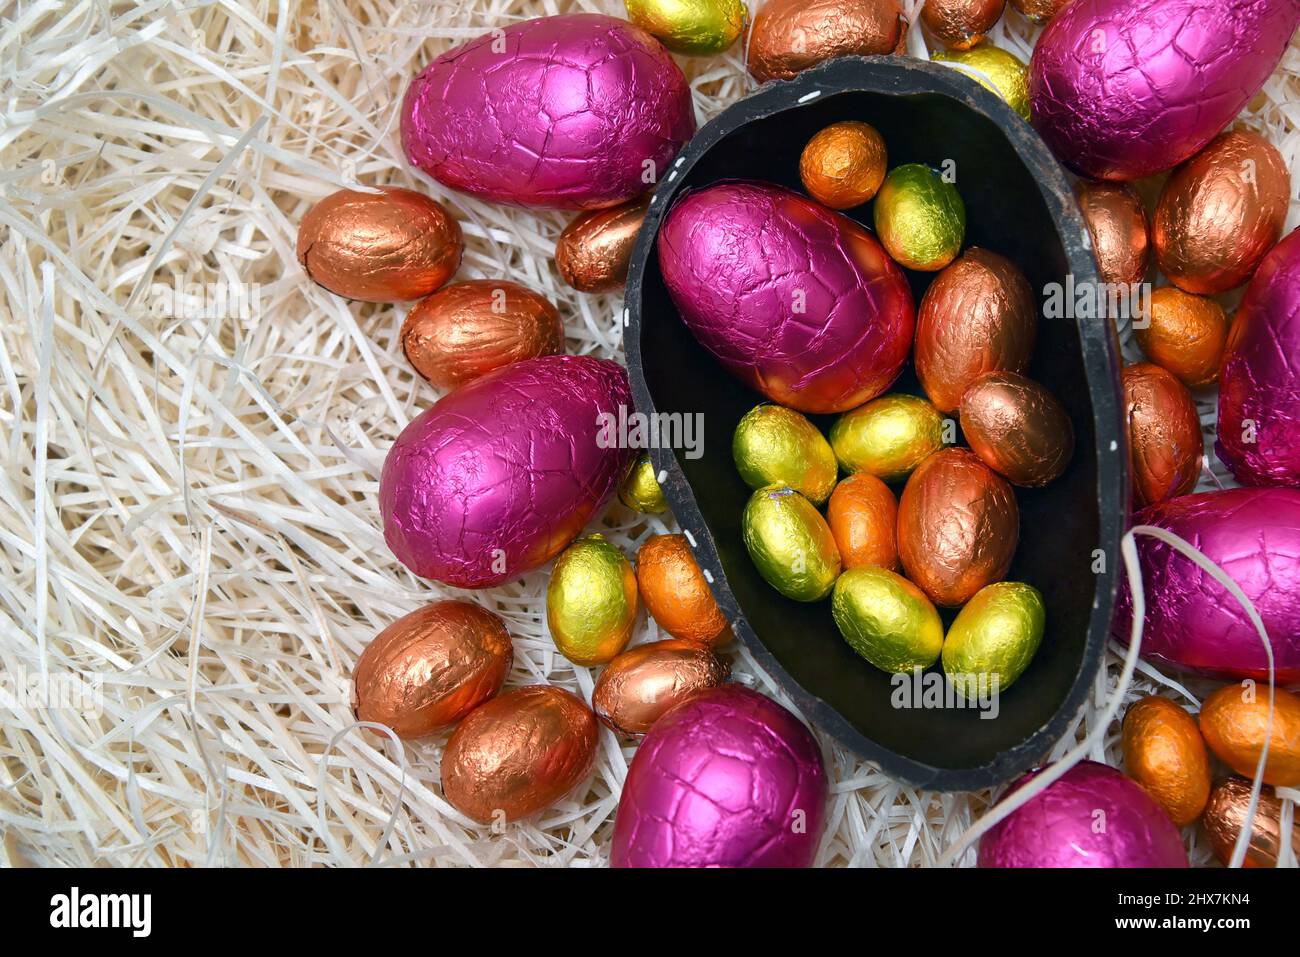 Pile of colorful foil wrapped chocolate easter eggs in pink, red, silver and gold with two halves of a large brown dark chocolate egg in the middle an Stock Photo